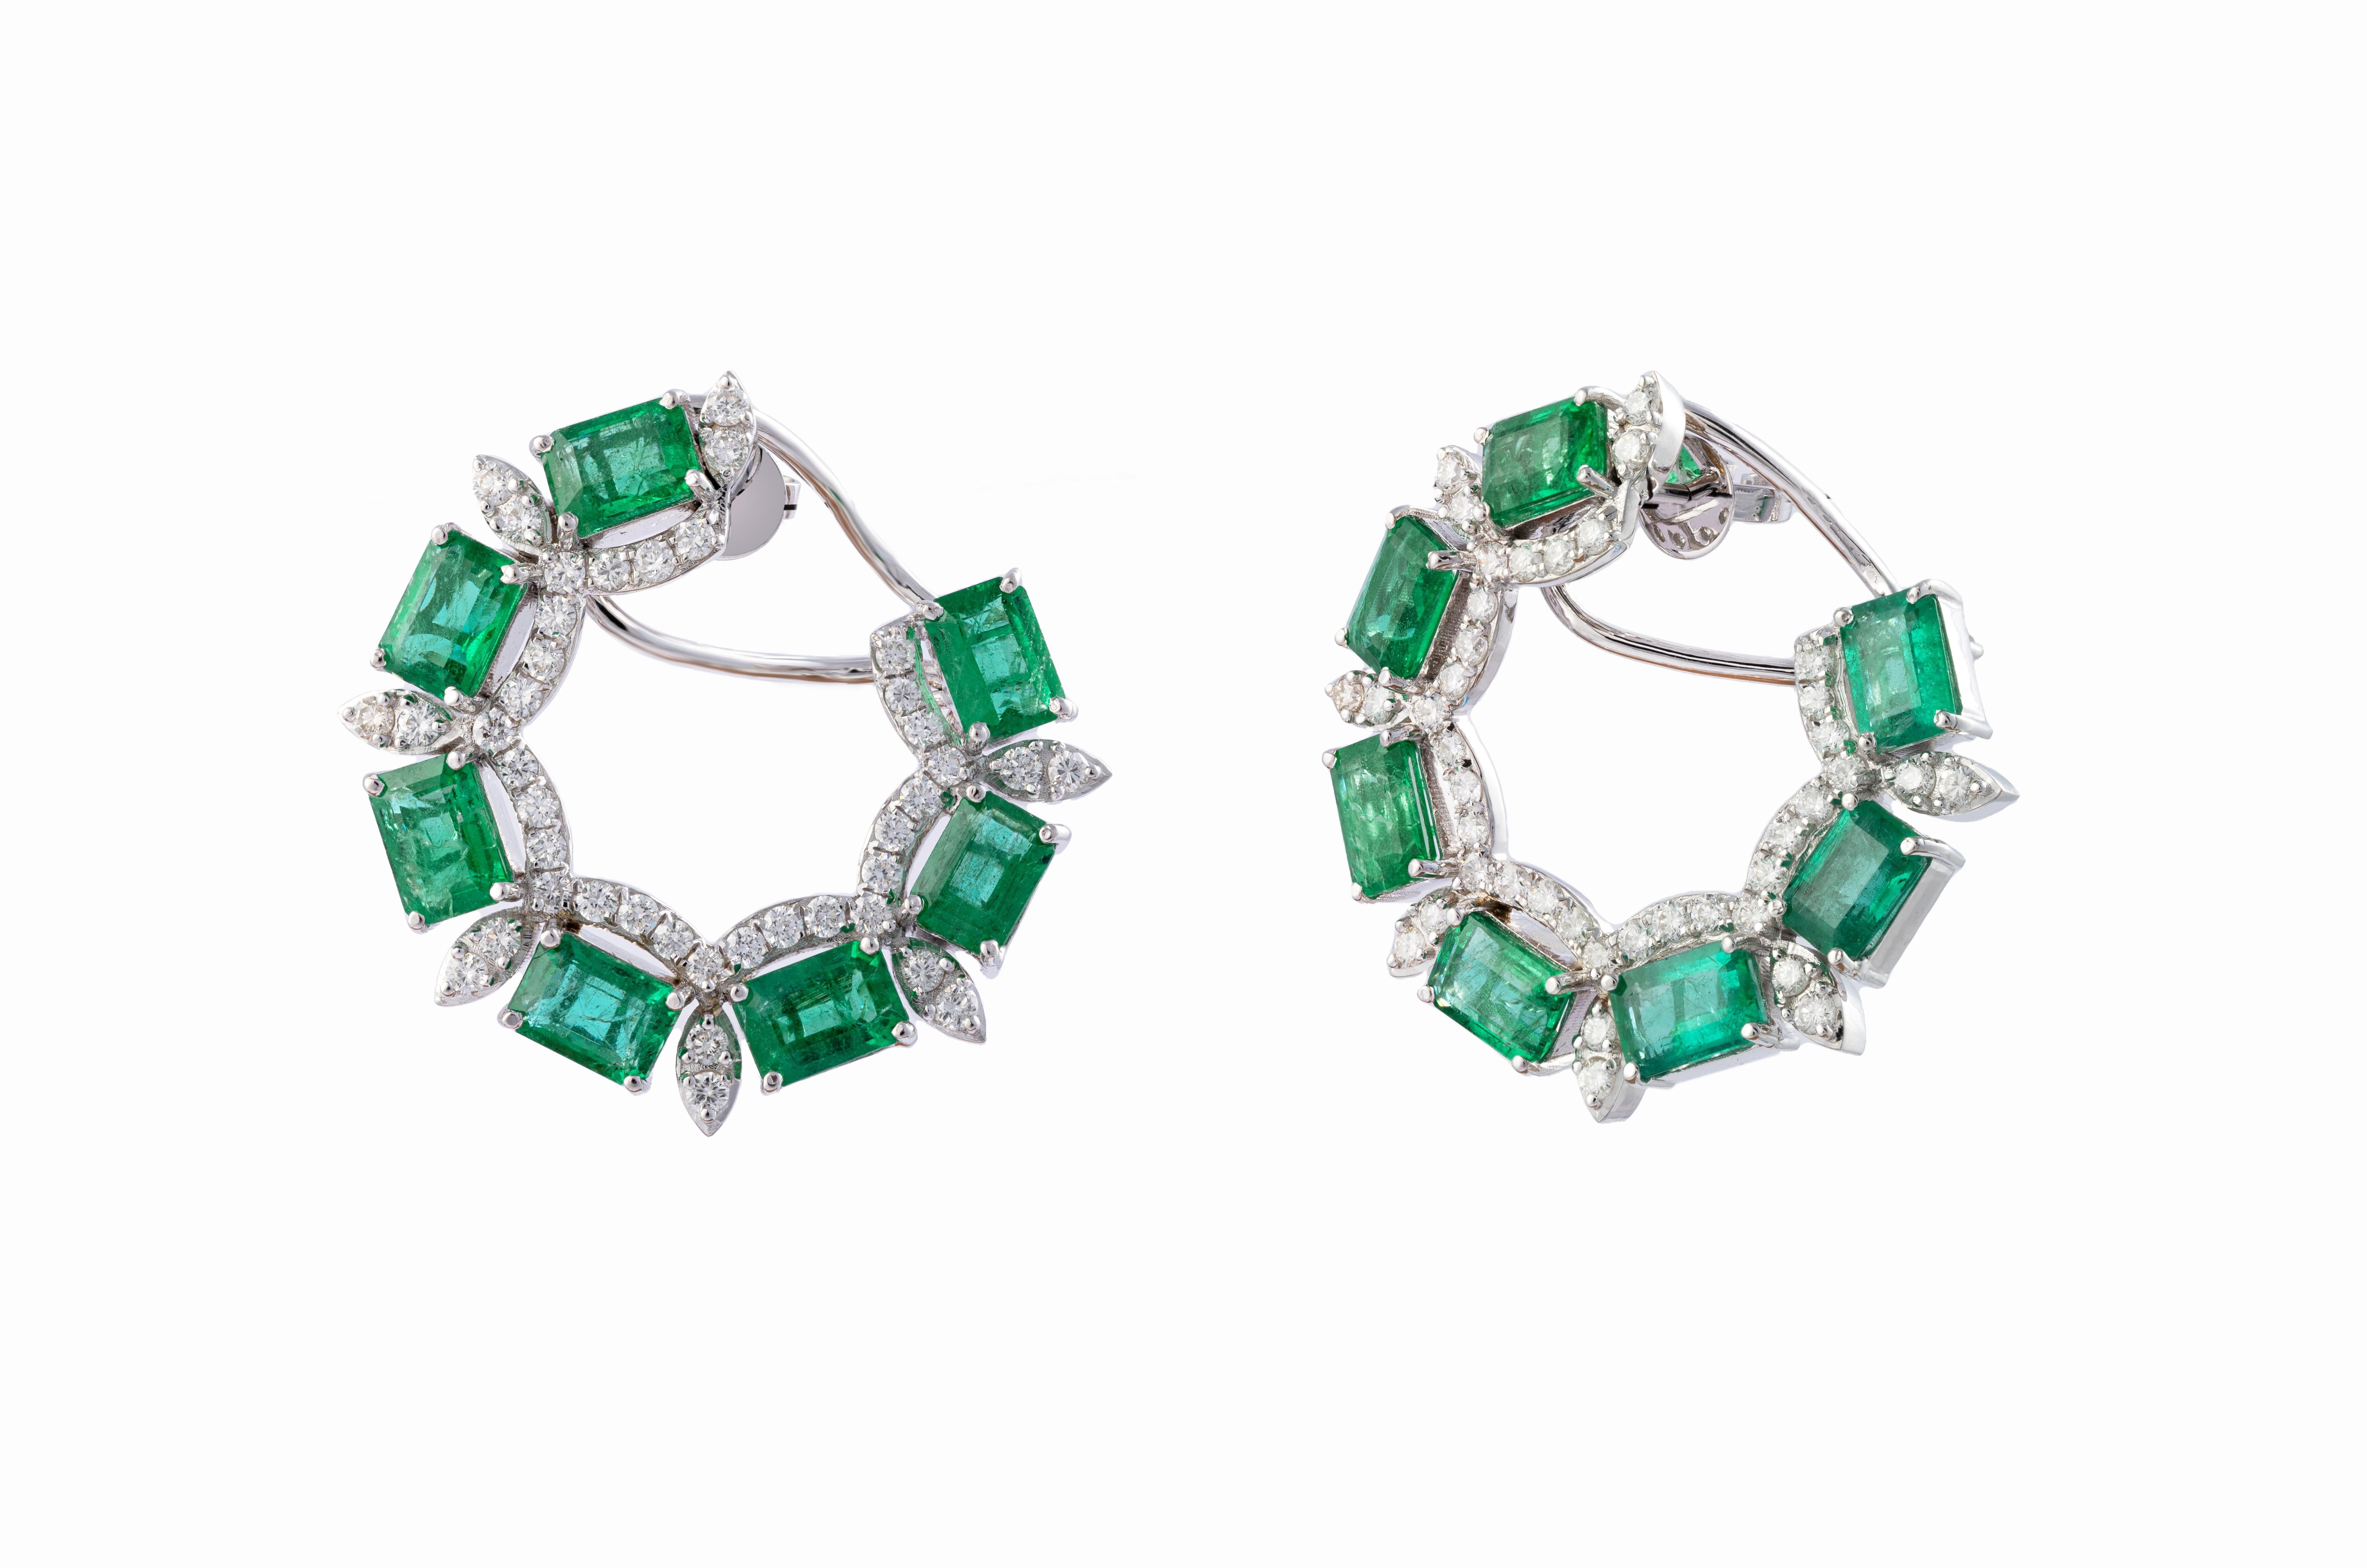 This is a beautiful Zambian natural Emerald earring with diamonds and 14k gold. the Emeralds are of very high quality and diamonds also vsi and g colour. 

total emerald octogens : 13.04 cts
         diamonds : 2.25 cts
gold: 18.662gms